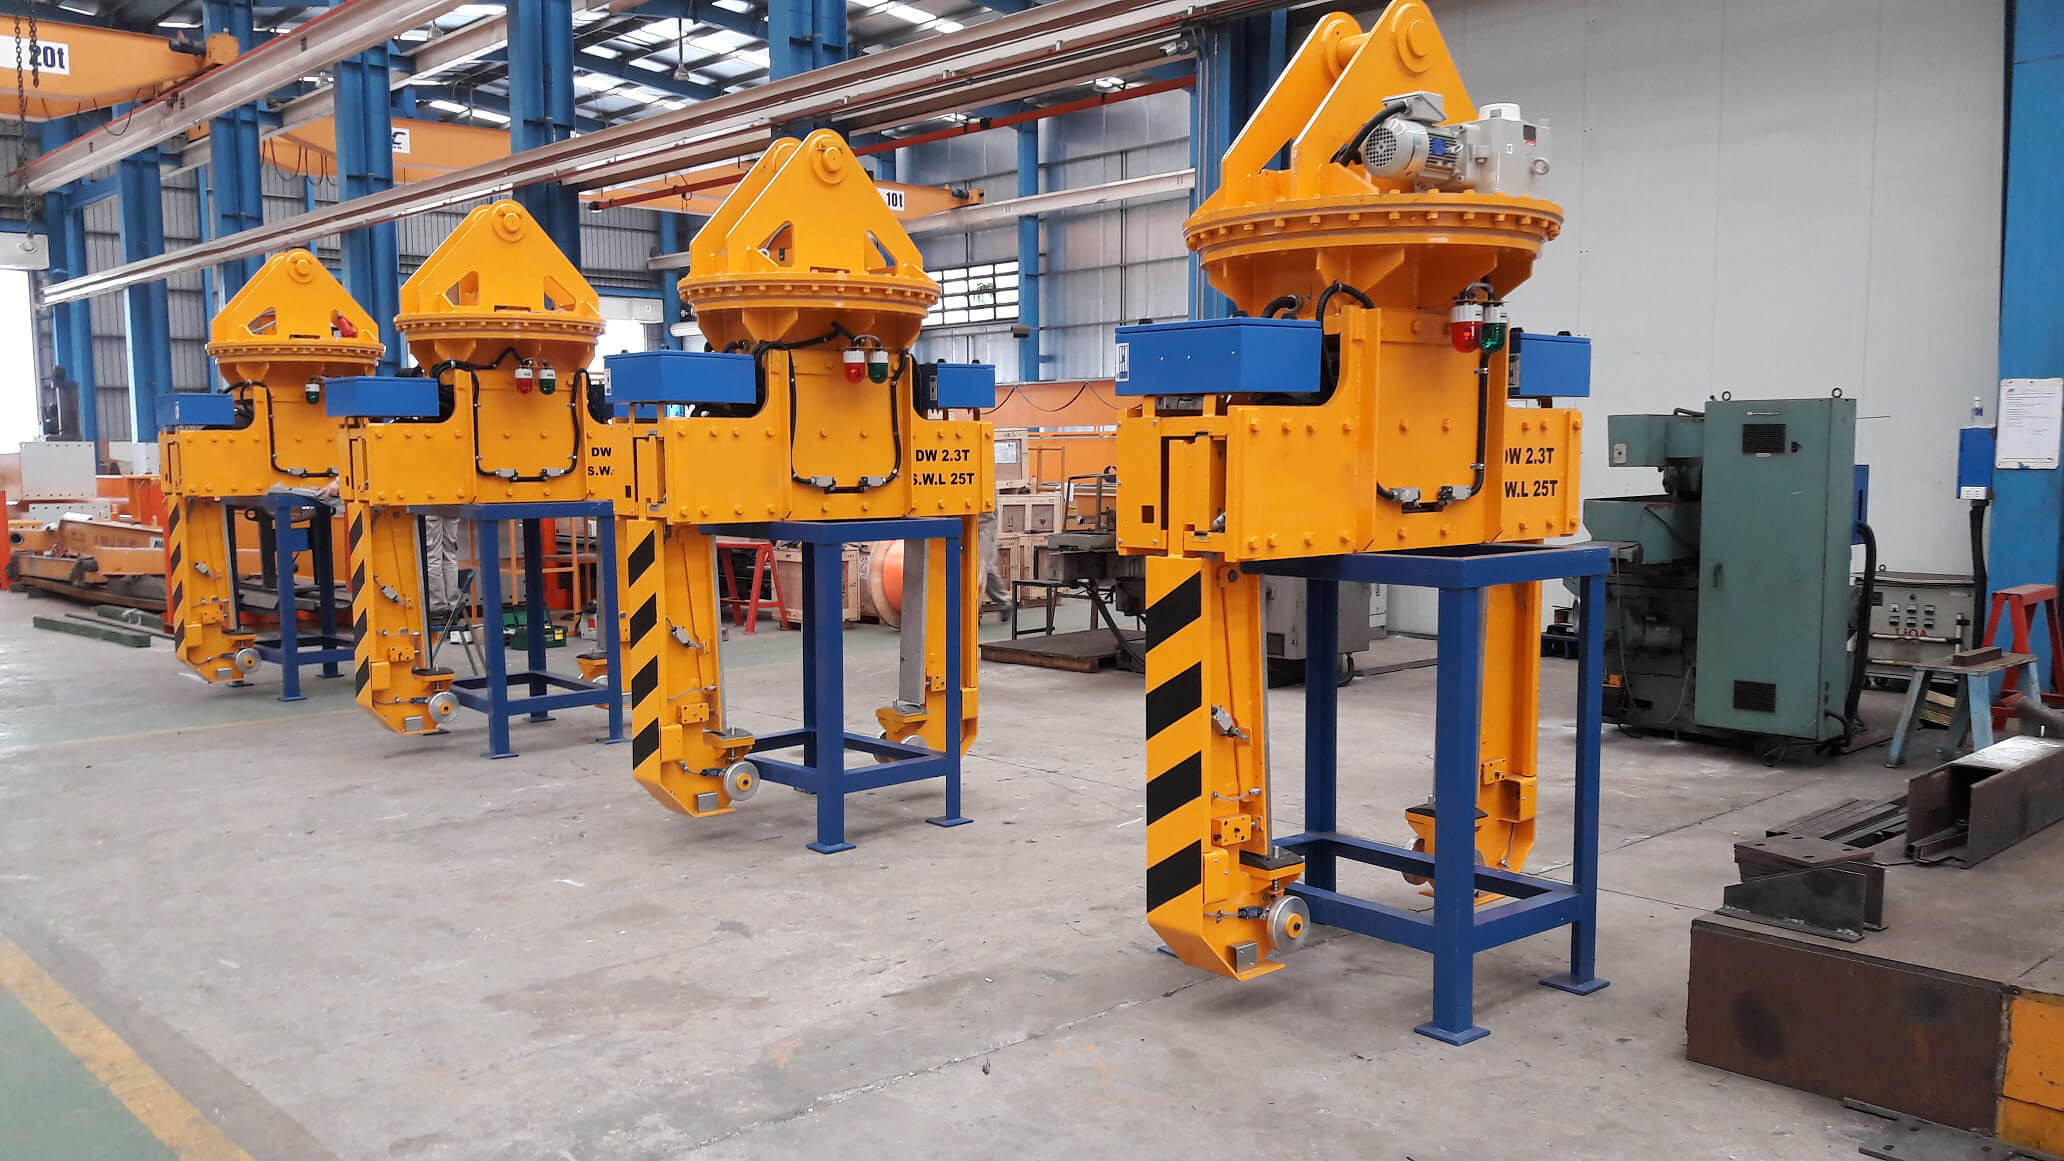 Clamp Coil Tong Lifter For Steel Coil or Paper Coil